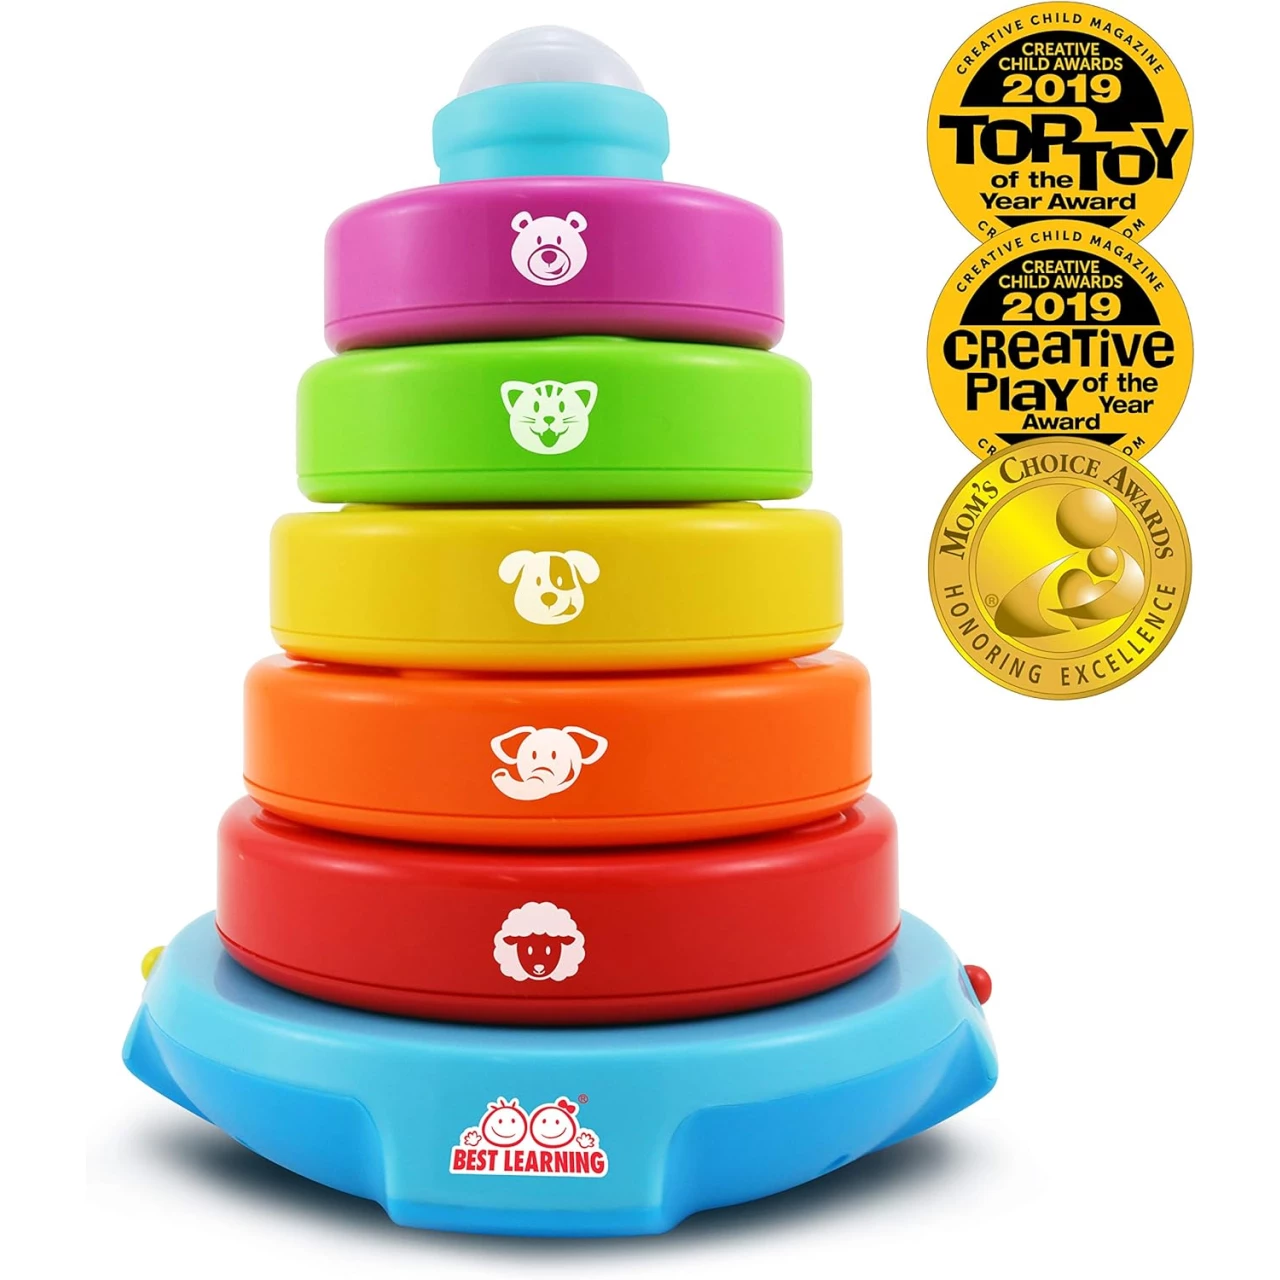 BEST LEARNING Stack &amp; Learn - Developmental Educational Activity Stacking Toy for Infants Babies Toddlers for 6 or 9 Month Old Baby Toys and Up | First 1 Year Boy Girl Birthday Present